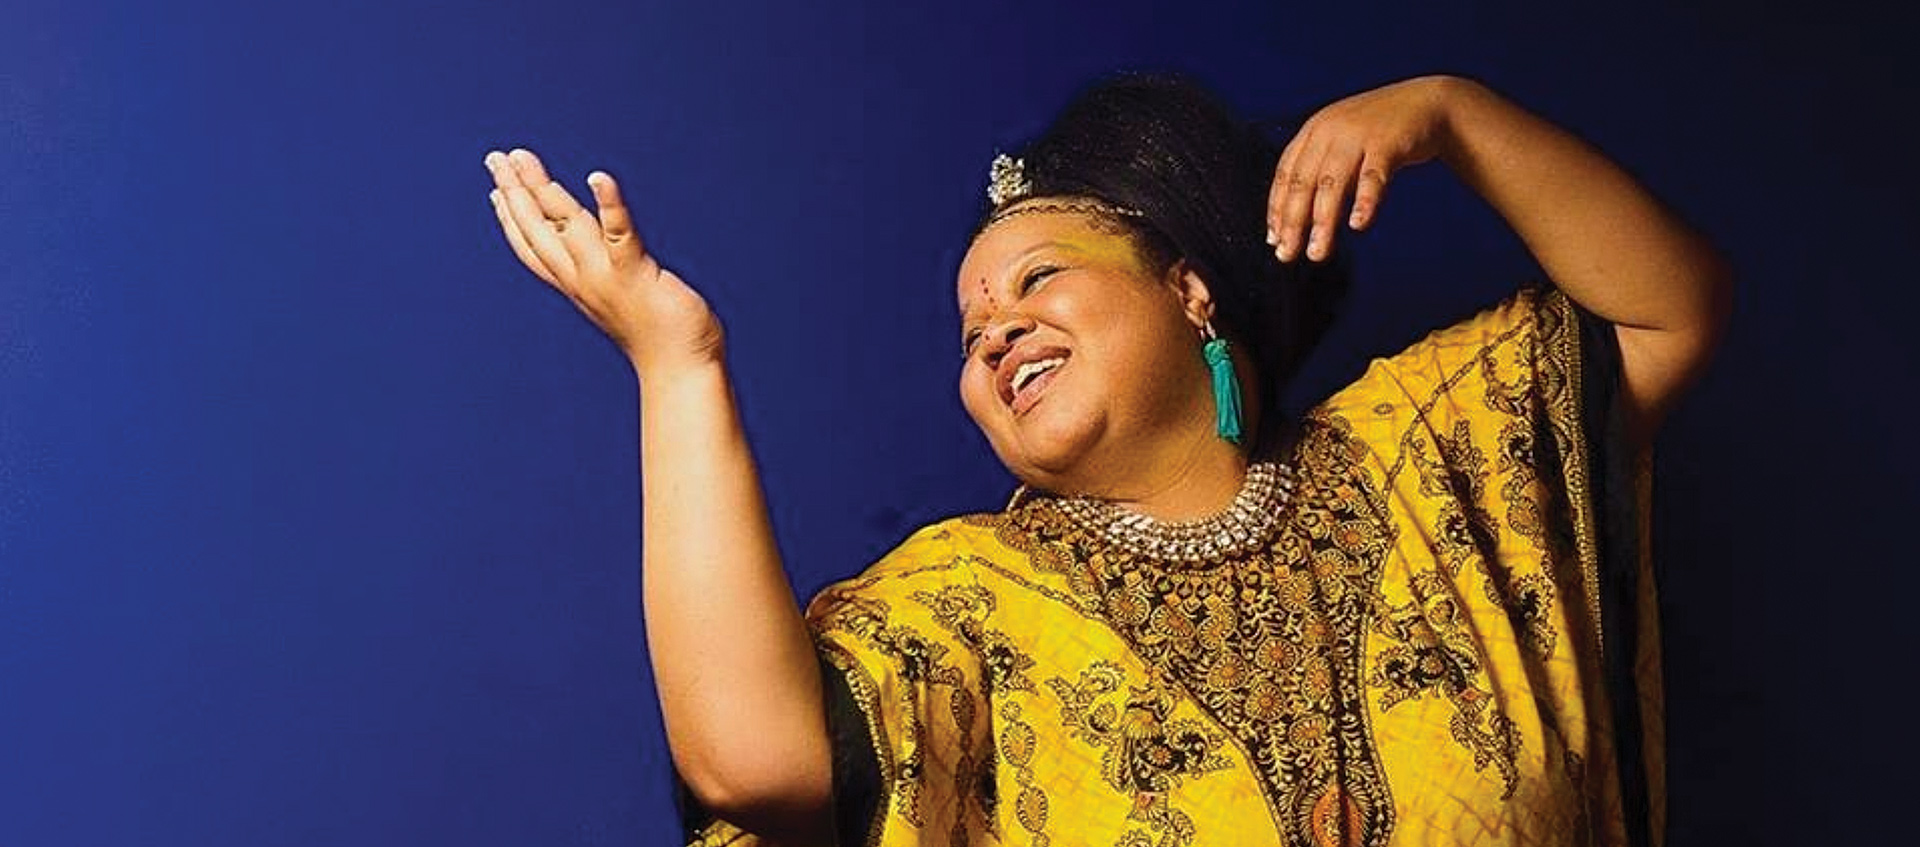 A picture of Chicago-based free jazz artist Angel Bat Dawid in a patterned bright yellow dress, smiling and looking to her right against a blue background